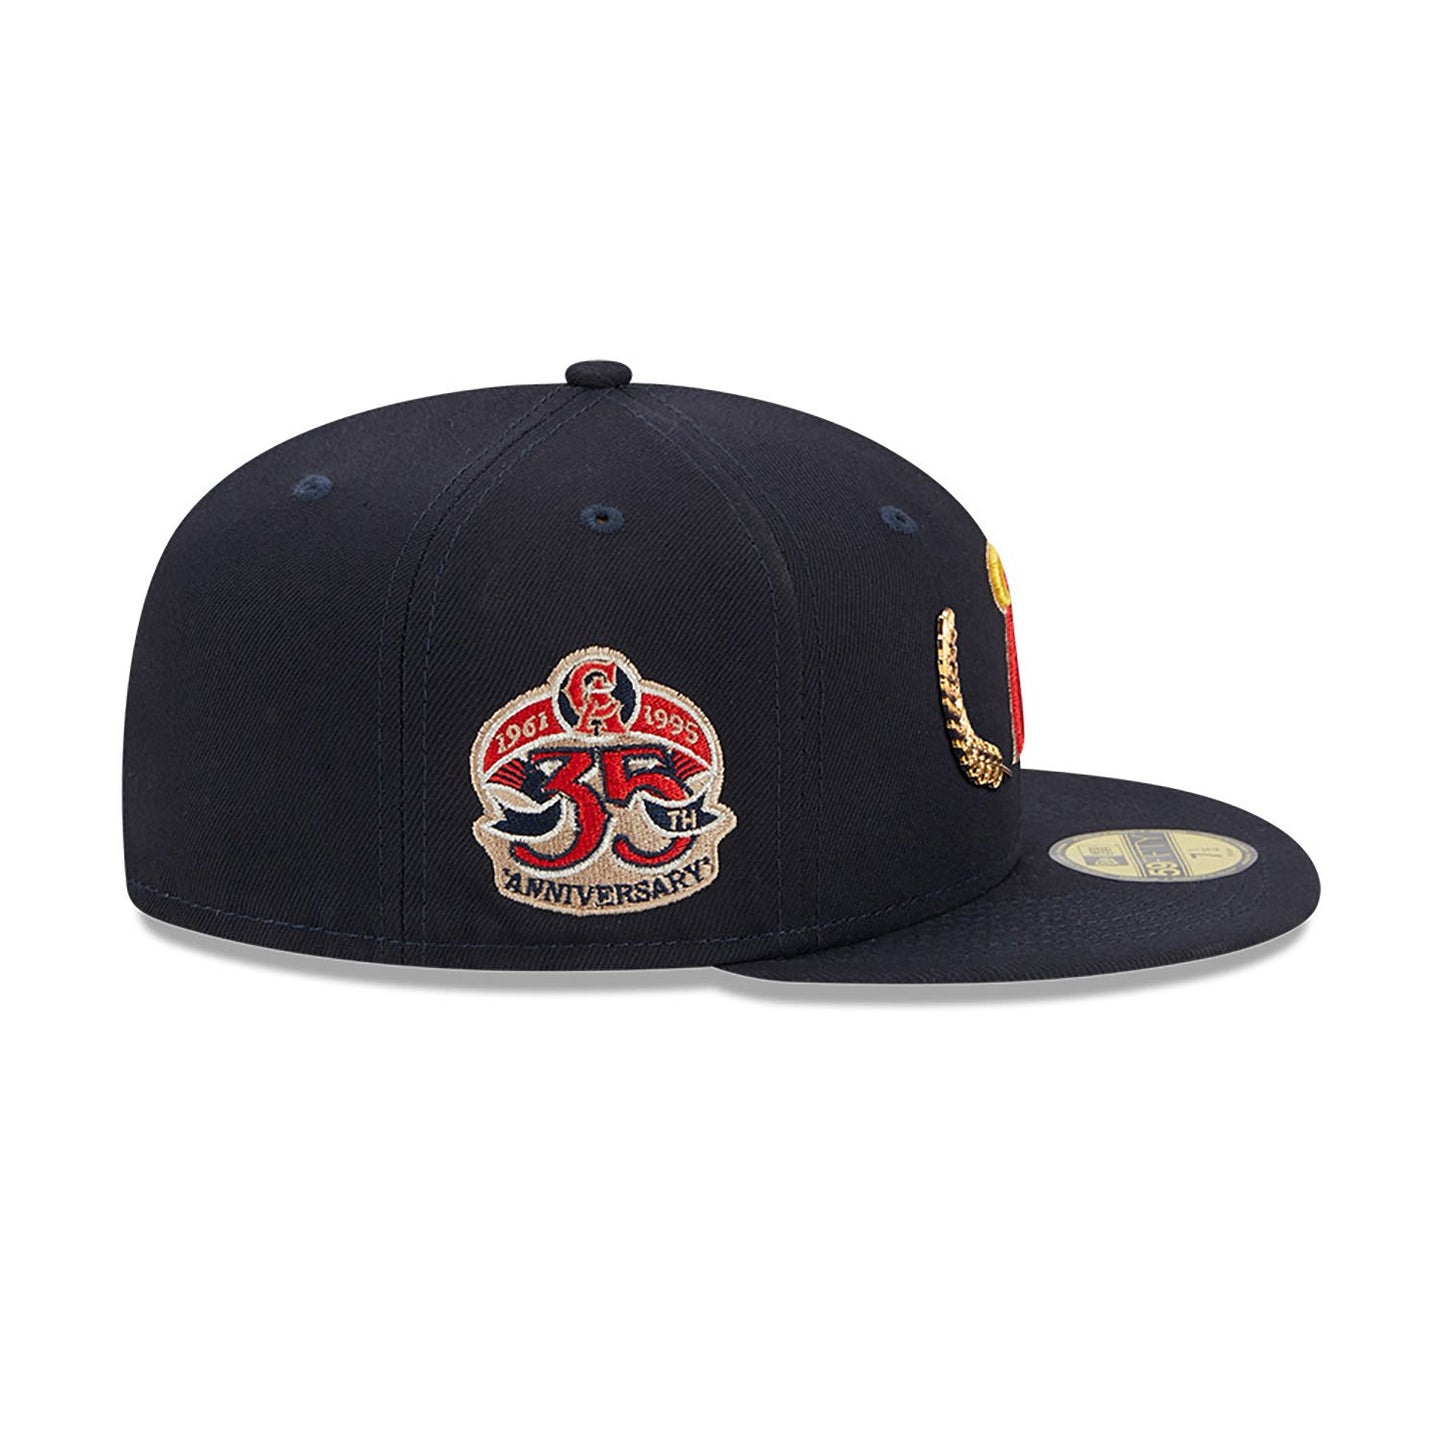 California Angels Gold Leaf Navy 59FIFTY Fitted Cap